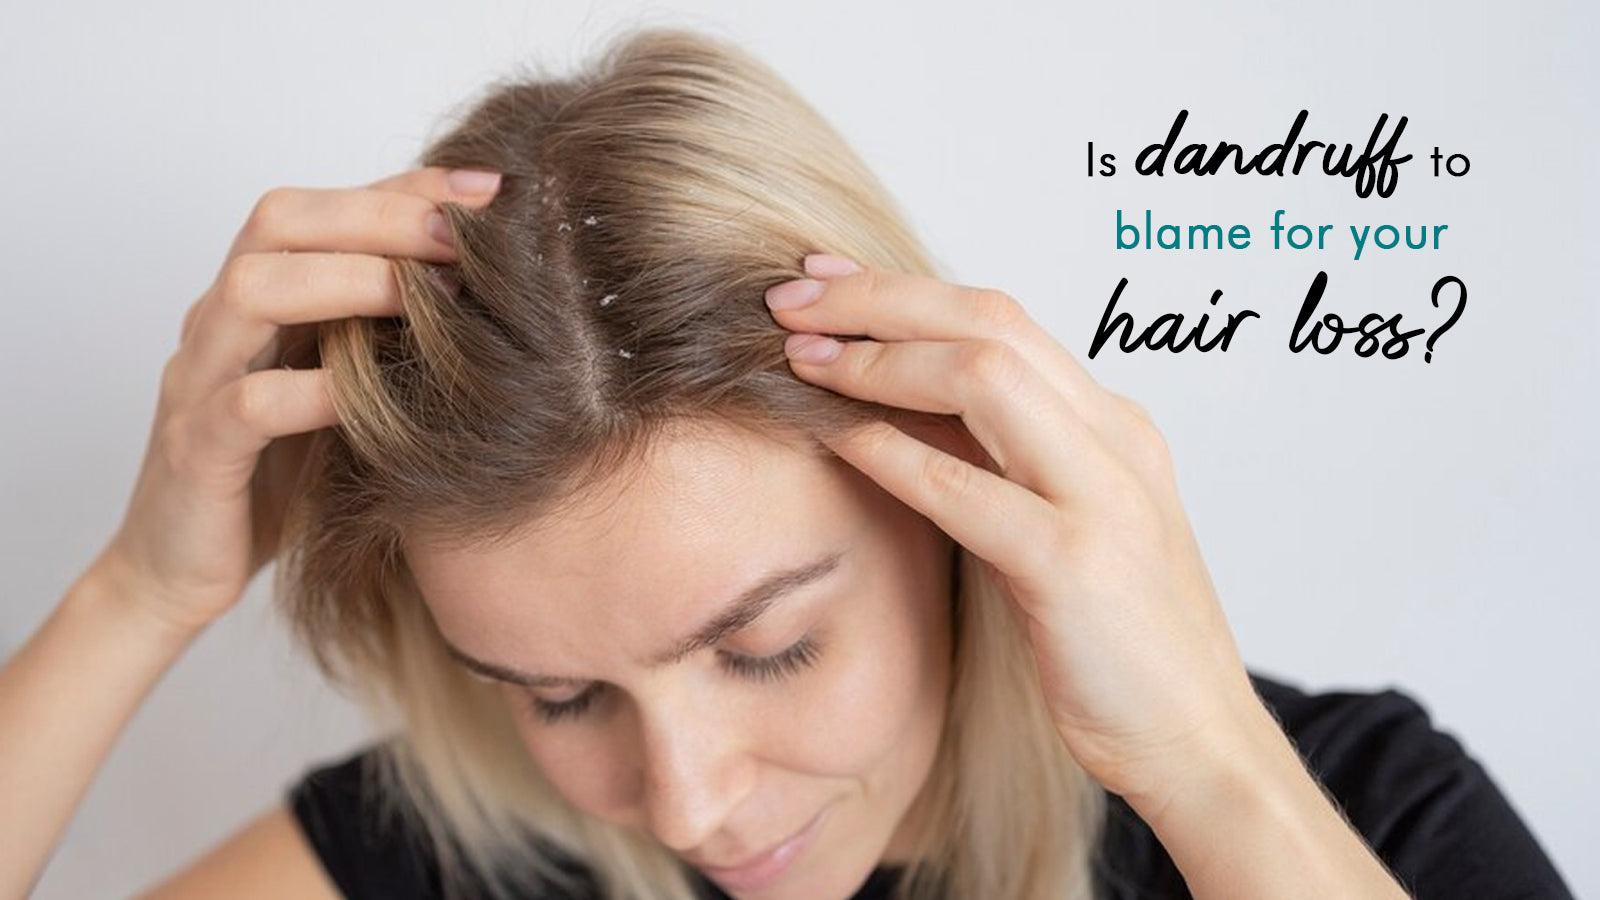 Is dandruff to blame for your hair loss?